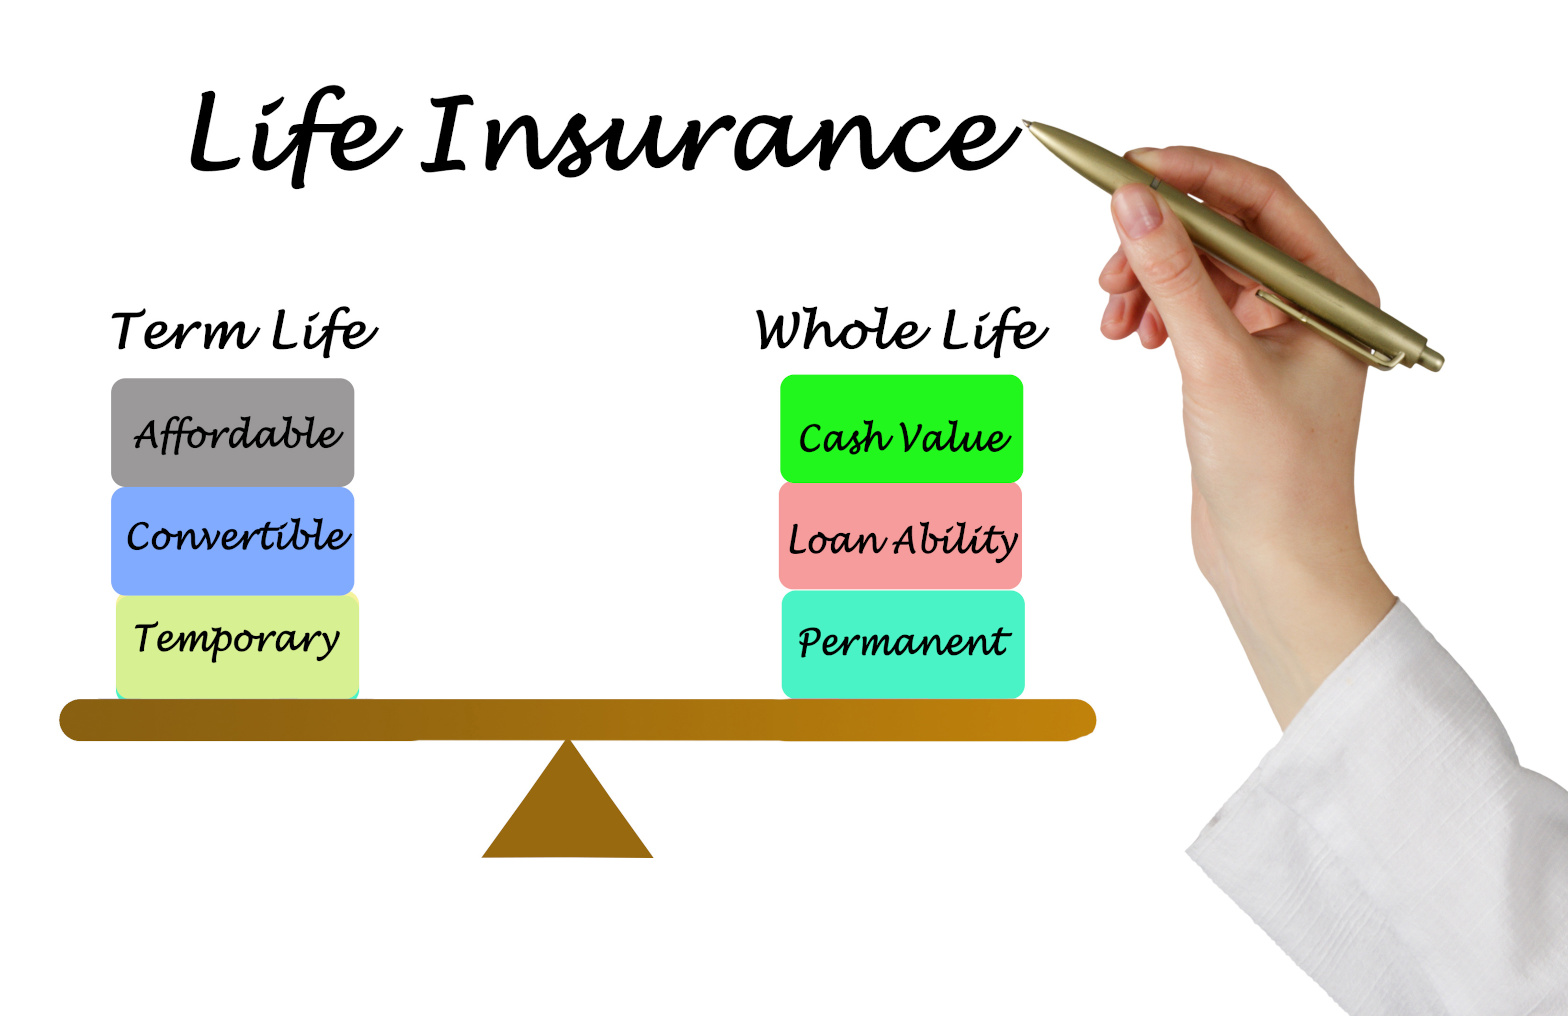 Types of Life Insurance